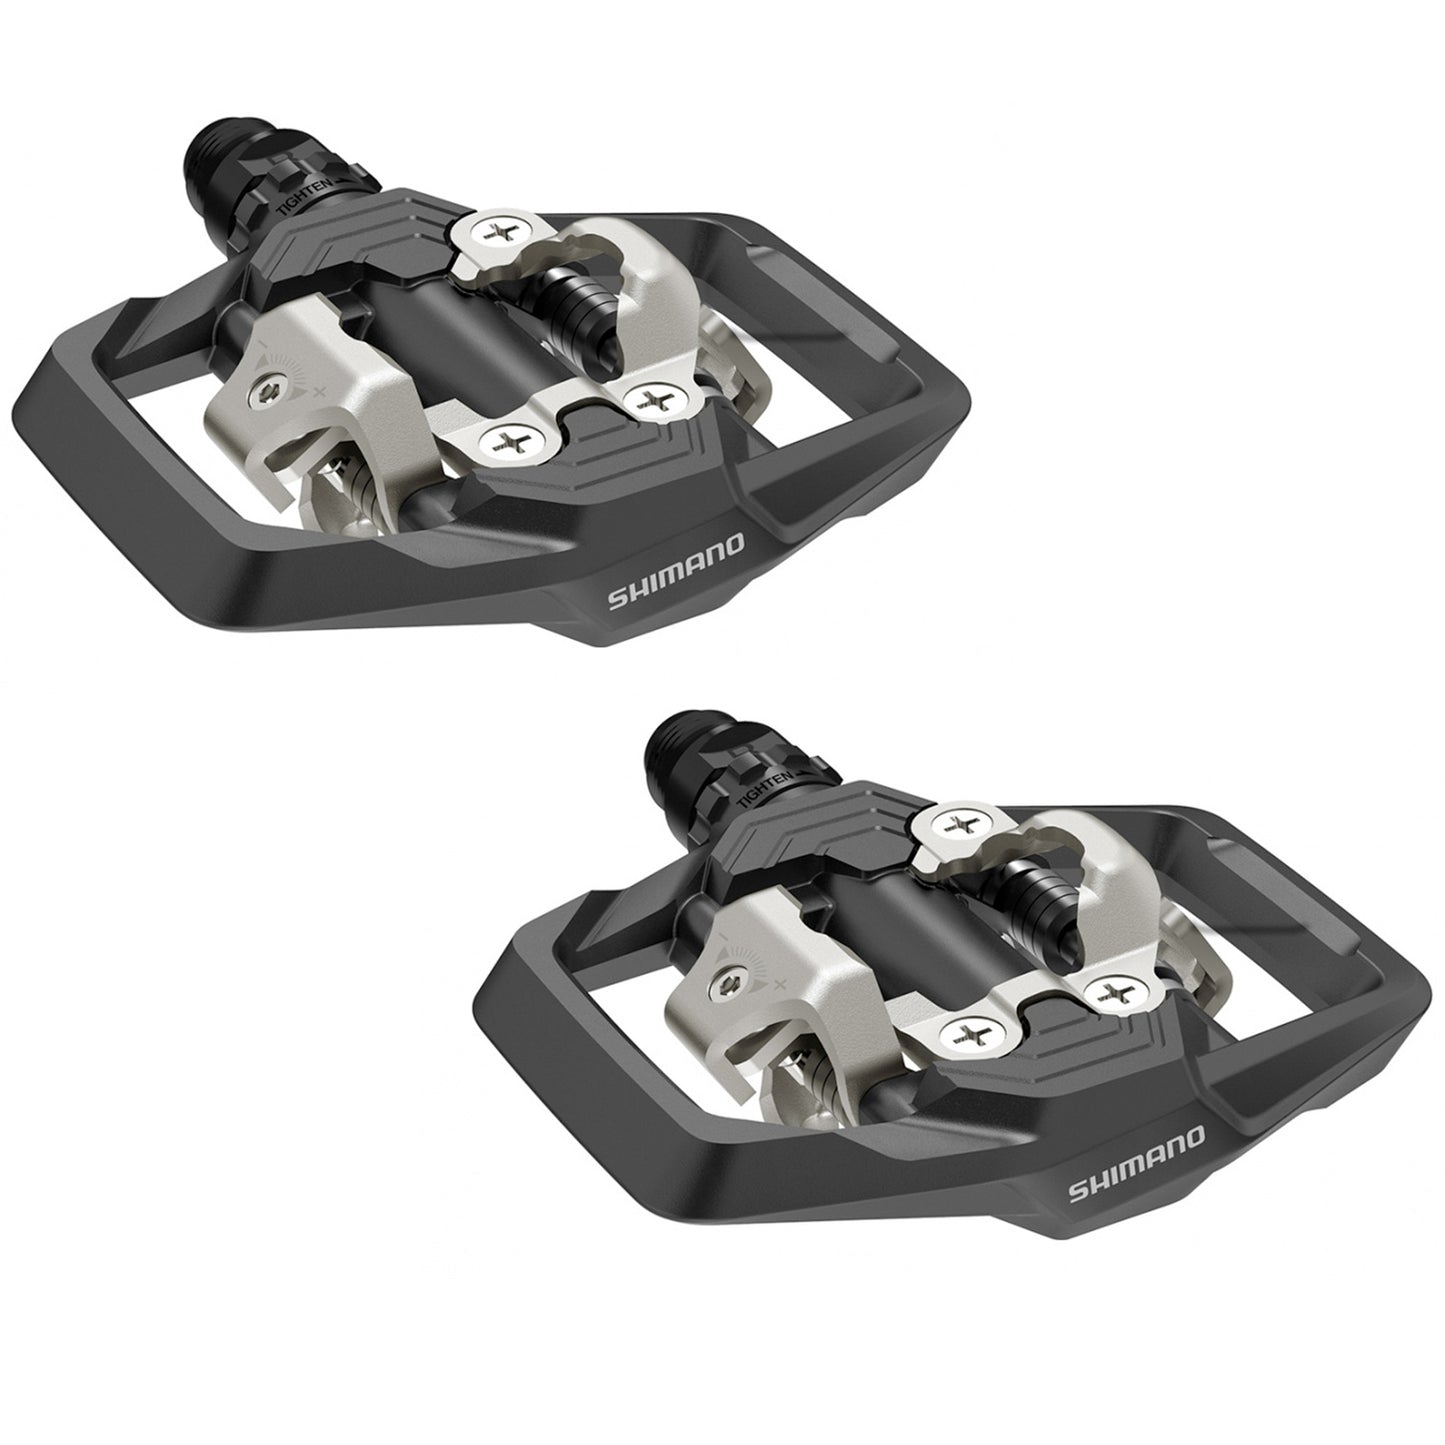 Shimano PD-ME700 SPD Dual Sided Mountain Bike Pedals